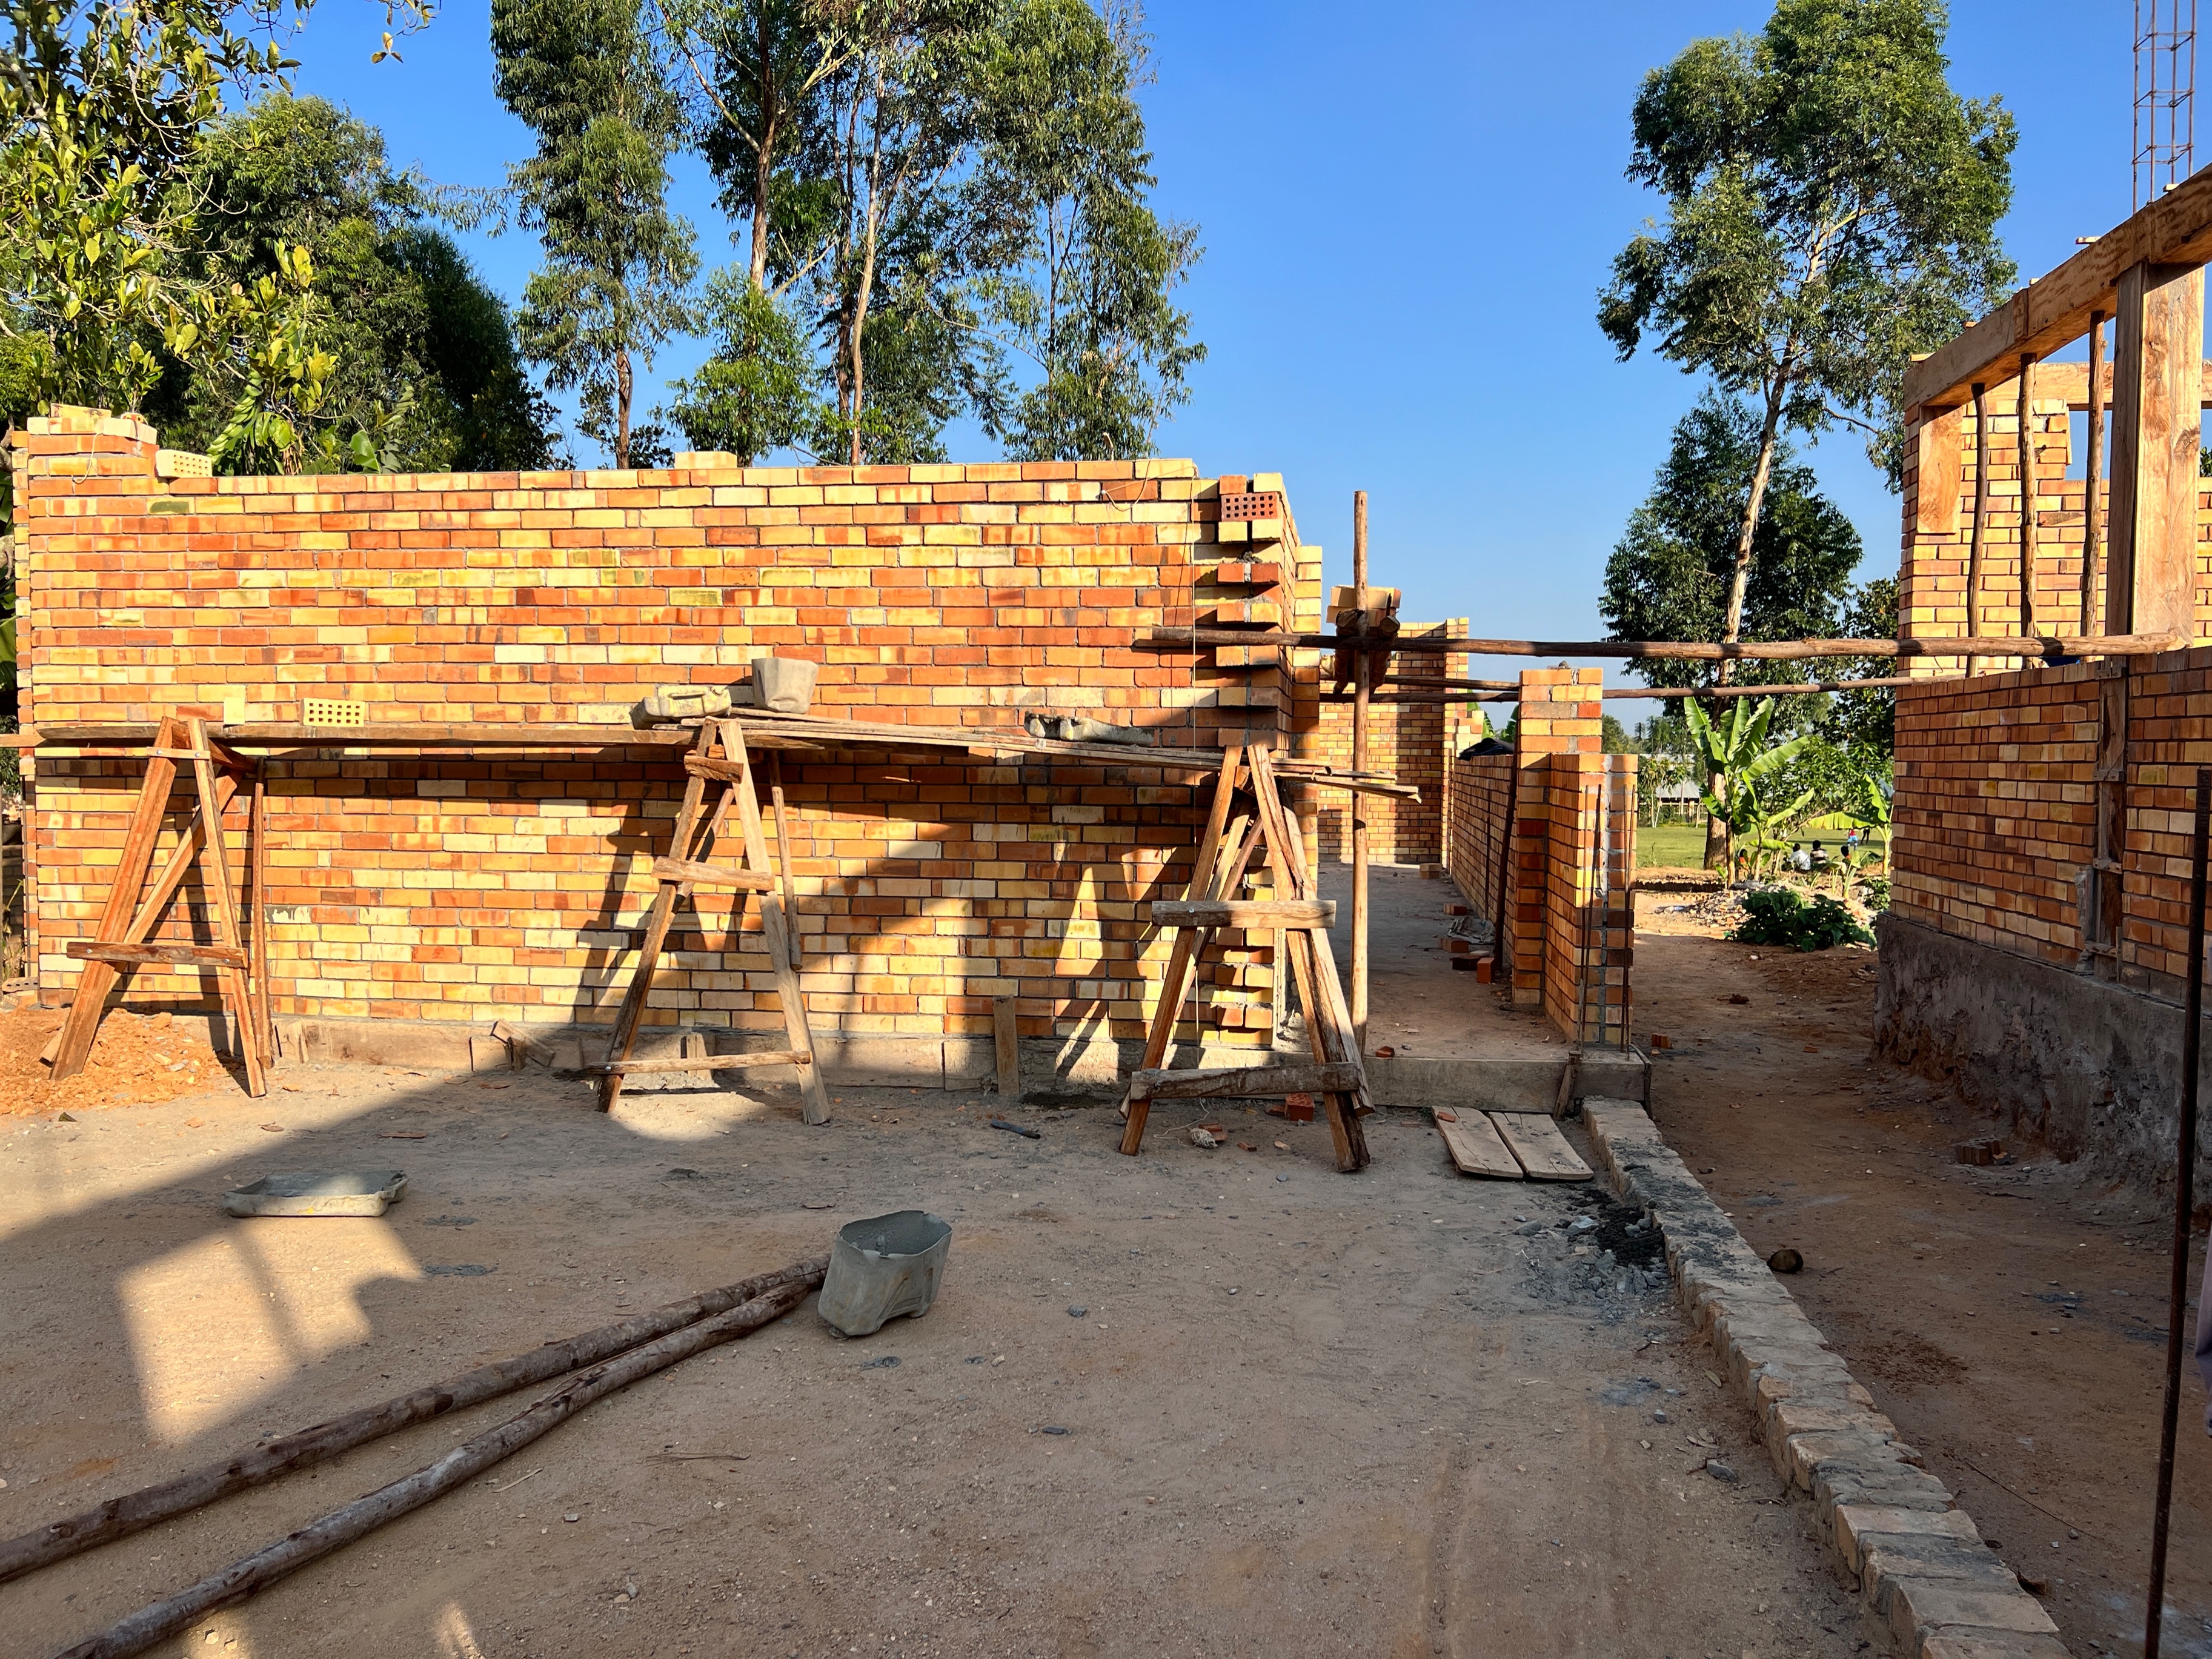 The Vocational Learning Center under construction.